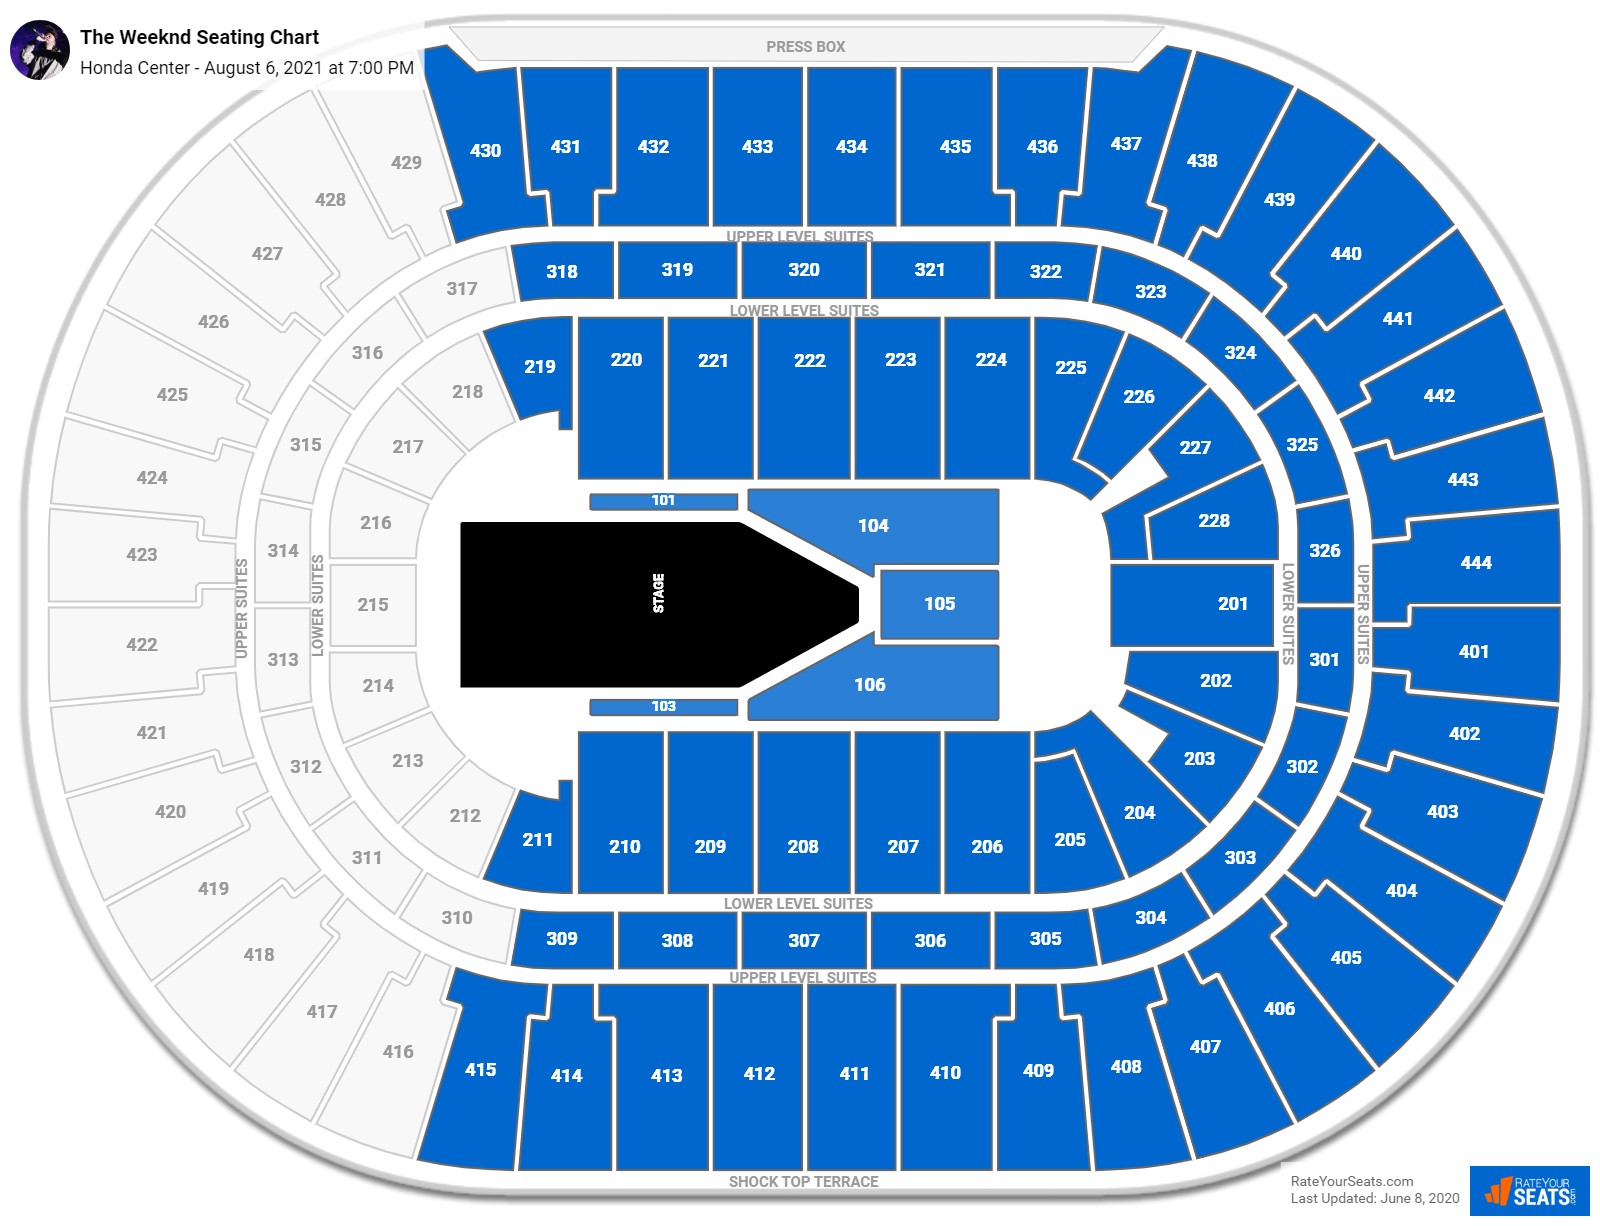 Honda Center Seating Charts for Concerts